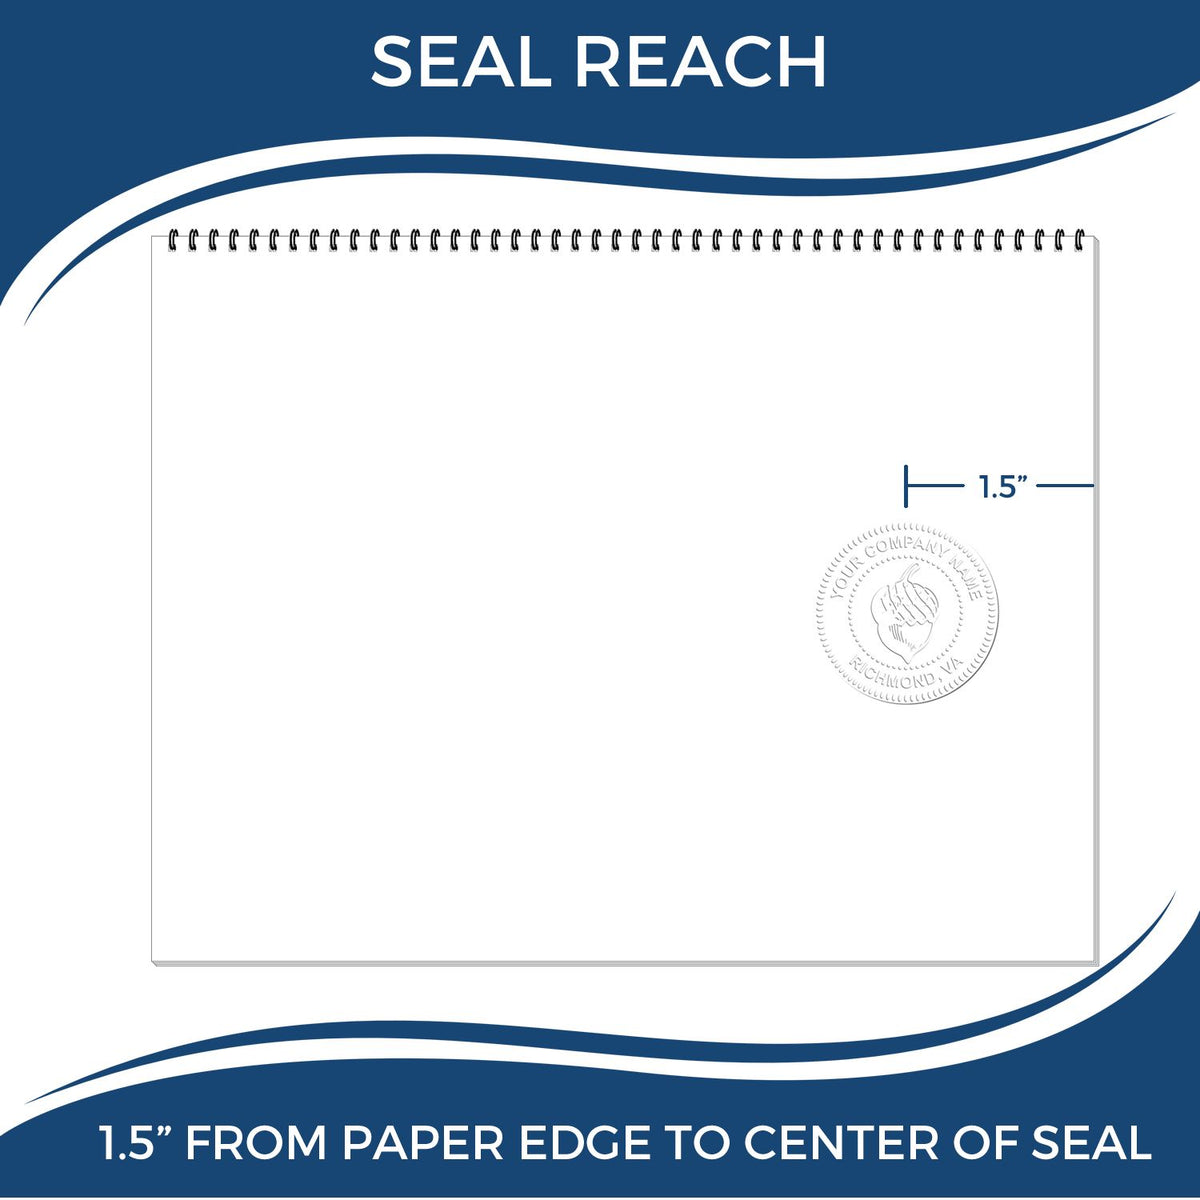 An infographic showing the seal reach which is represented by a ruler and a miniature seal image of the Washington Desk Architect Embossing Seal